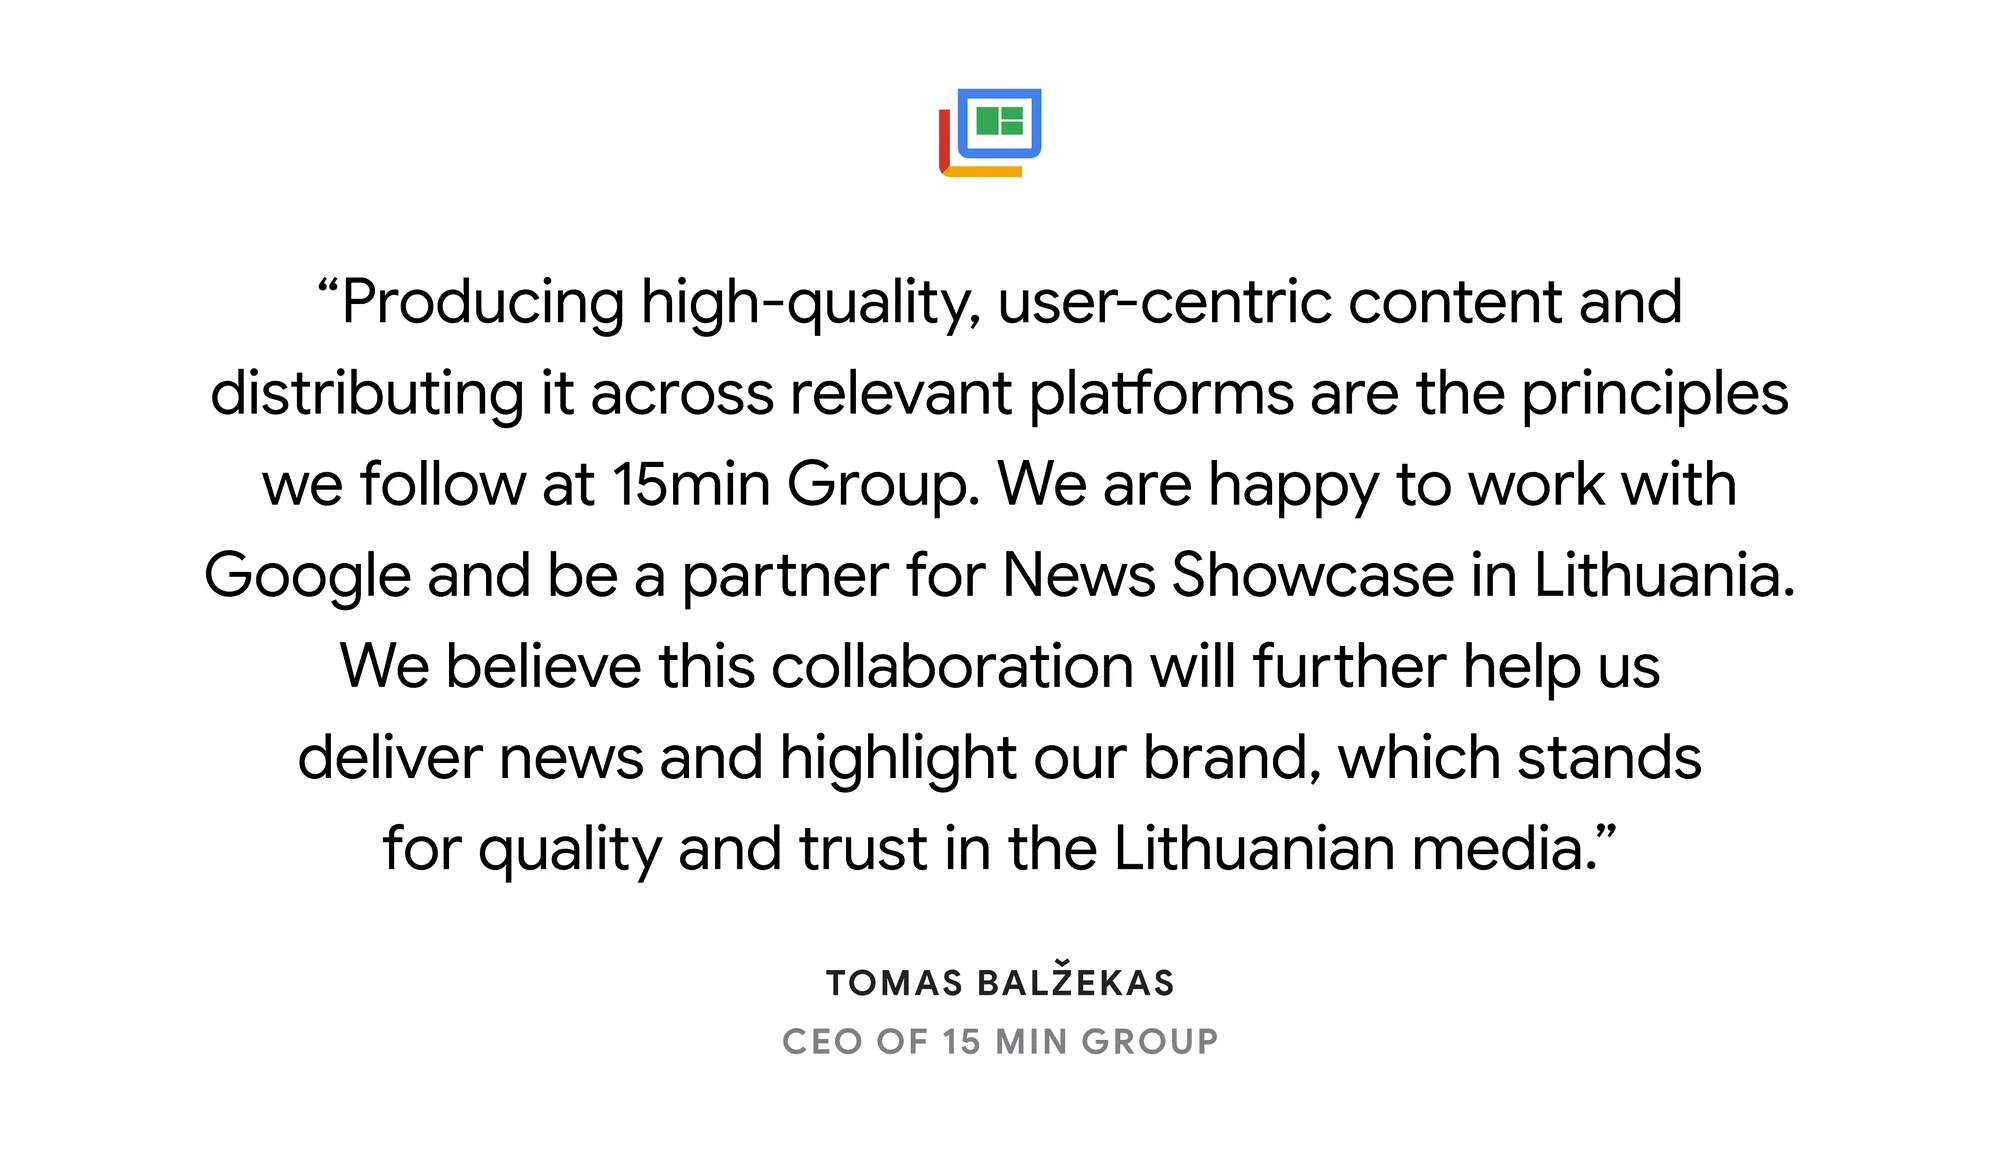 Illustrated card reading: “Producing high-quality, user-centric content and distributing it across relevant platforms are the principles we follow at 15min Group. We are happy to work with Google and be a partner for News Showcase in Lithuania. We believe this collaboration will further help us deliver news and highlight our brand, which stands for quality and trust in the Lithuanian media.” Tomas Balžekas, CEO, 15min Group